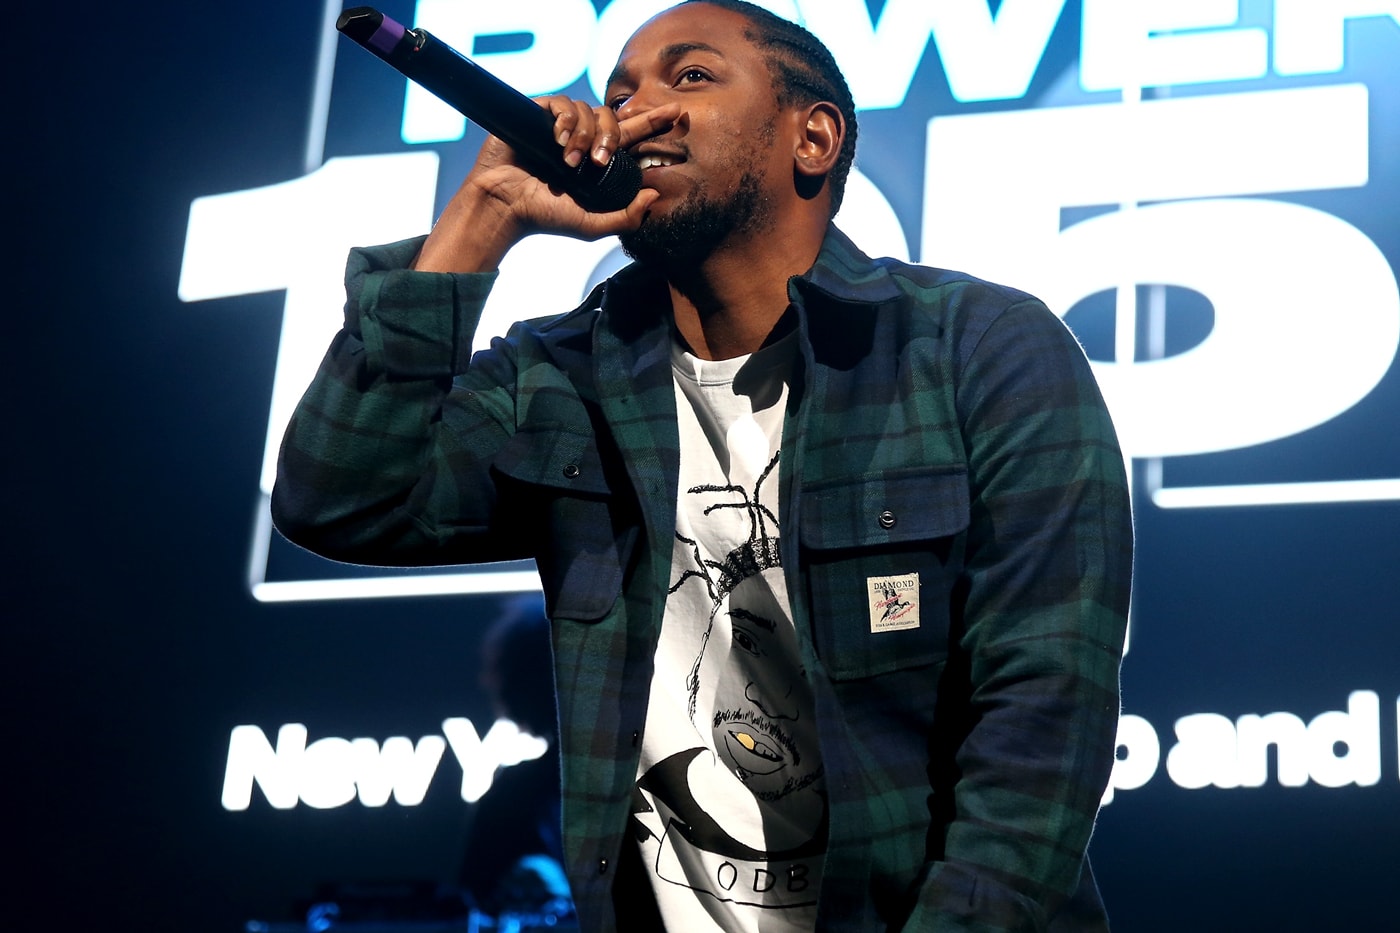 photos-of-kendrick-lamars-second-reebok-shoe-collab-have-surfaced